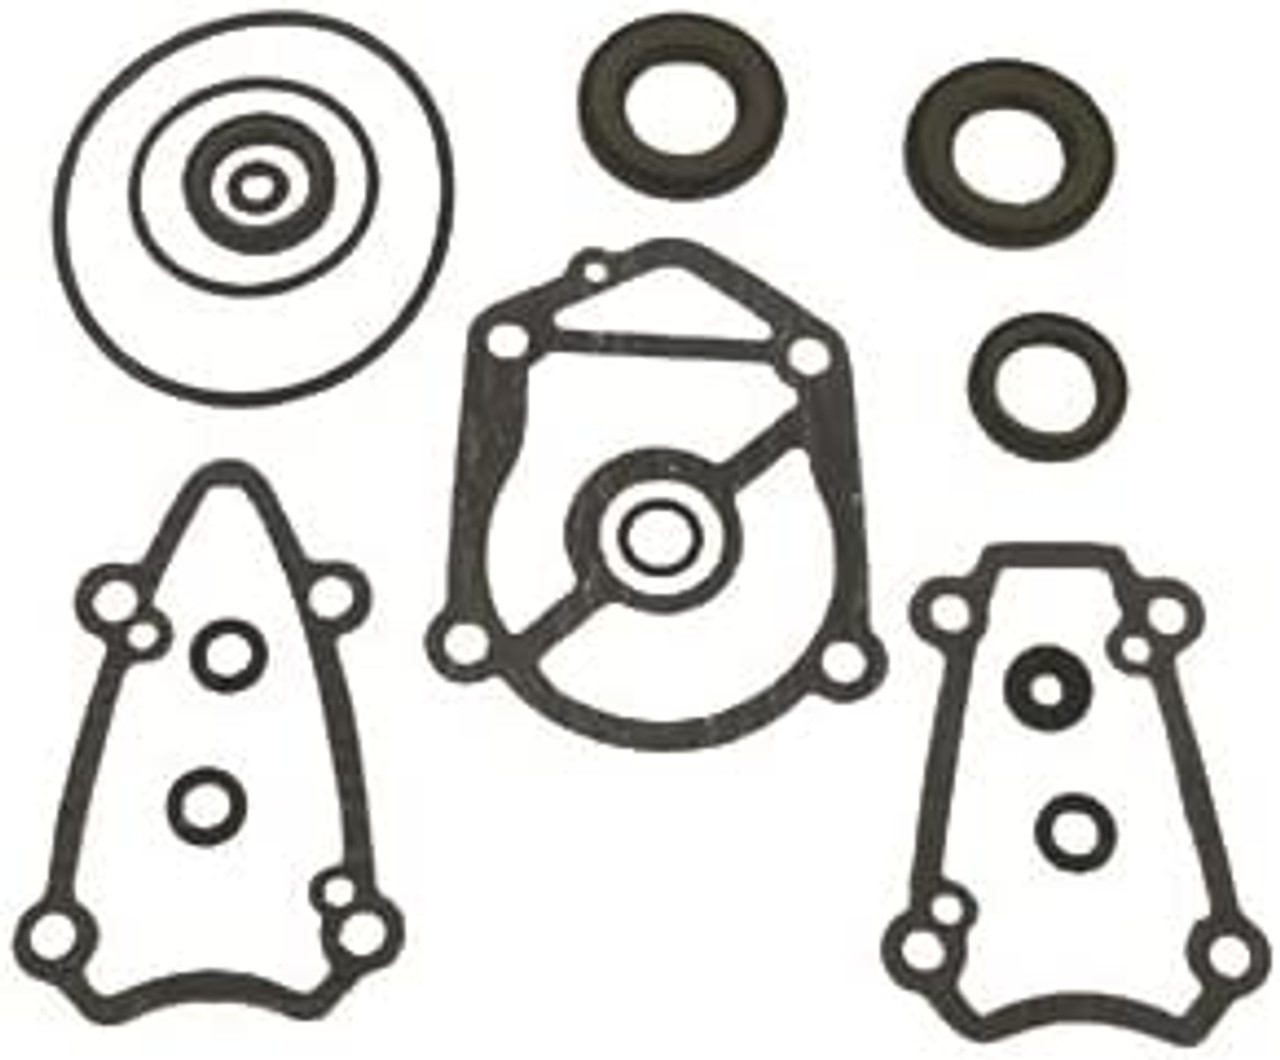 Lower Unit Seal Kit by Sea Star Solutions (18-8338) ProPride Marine